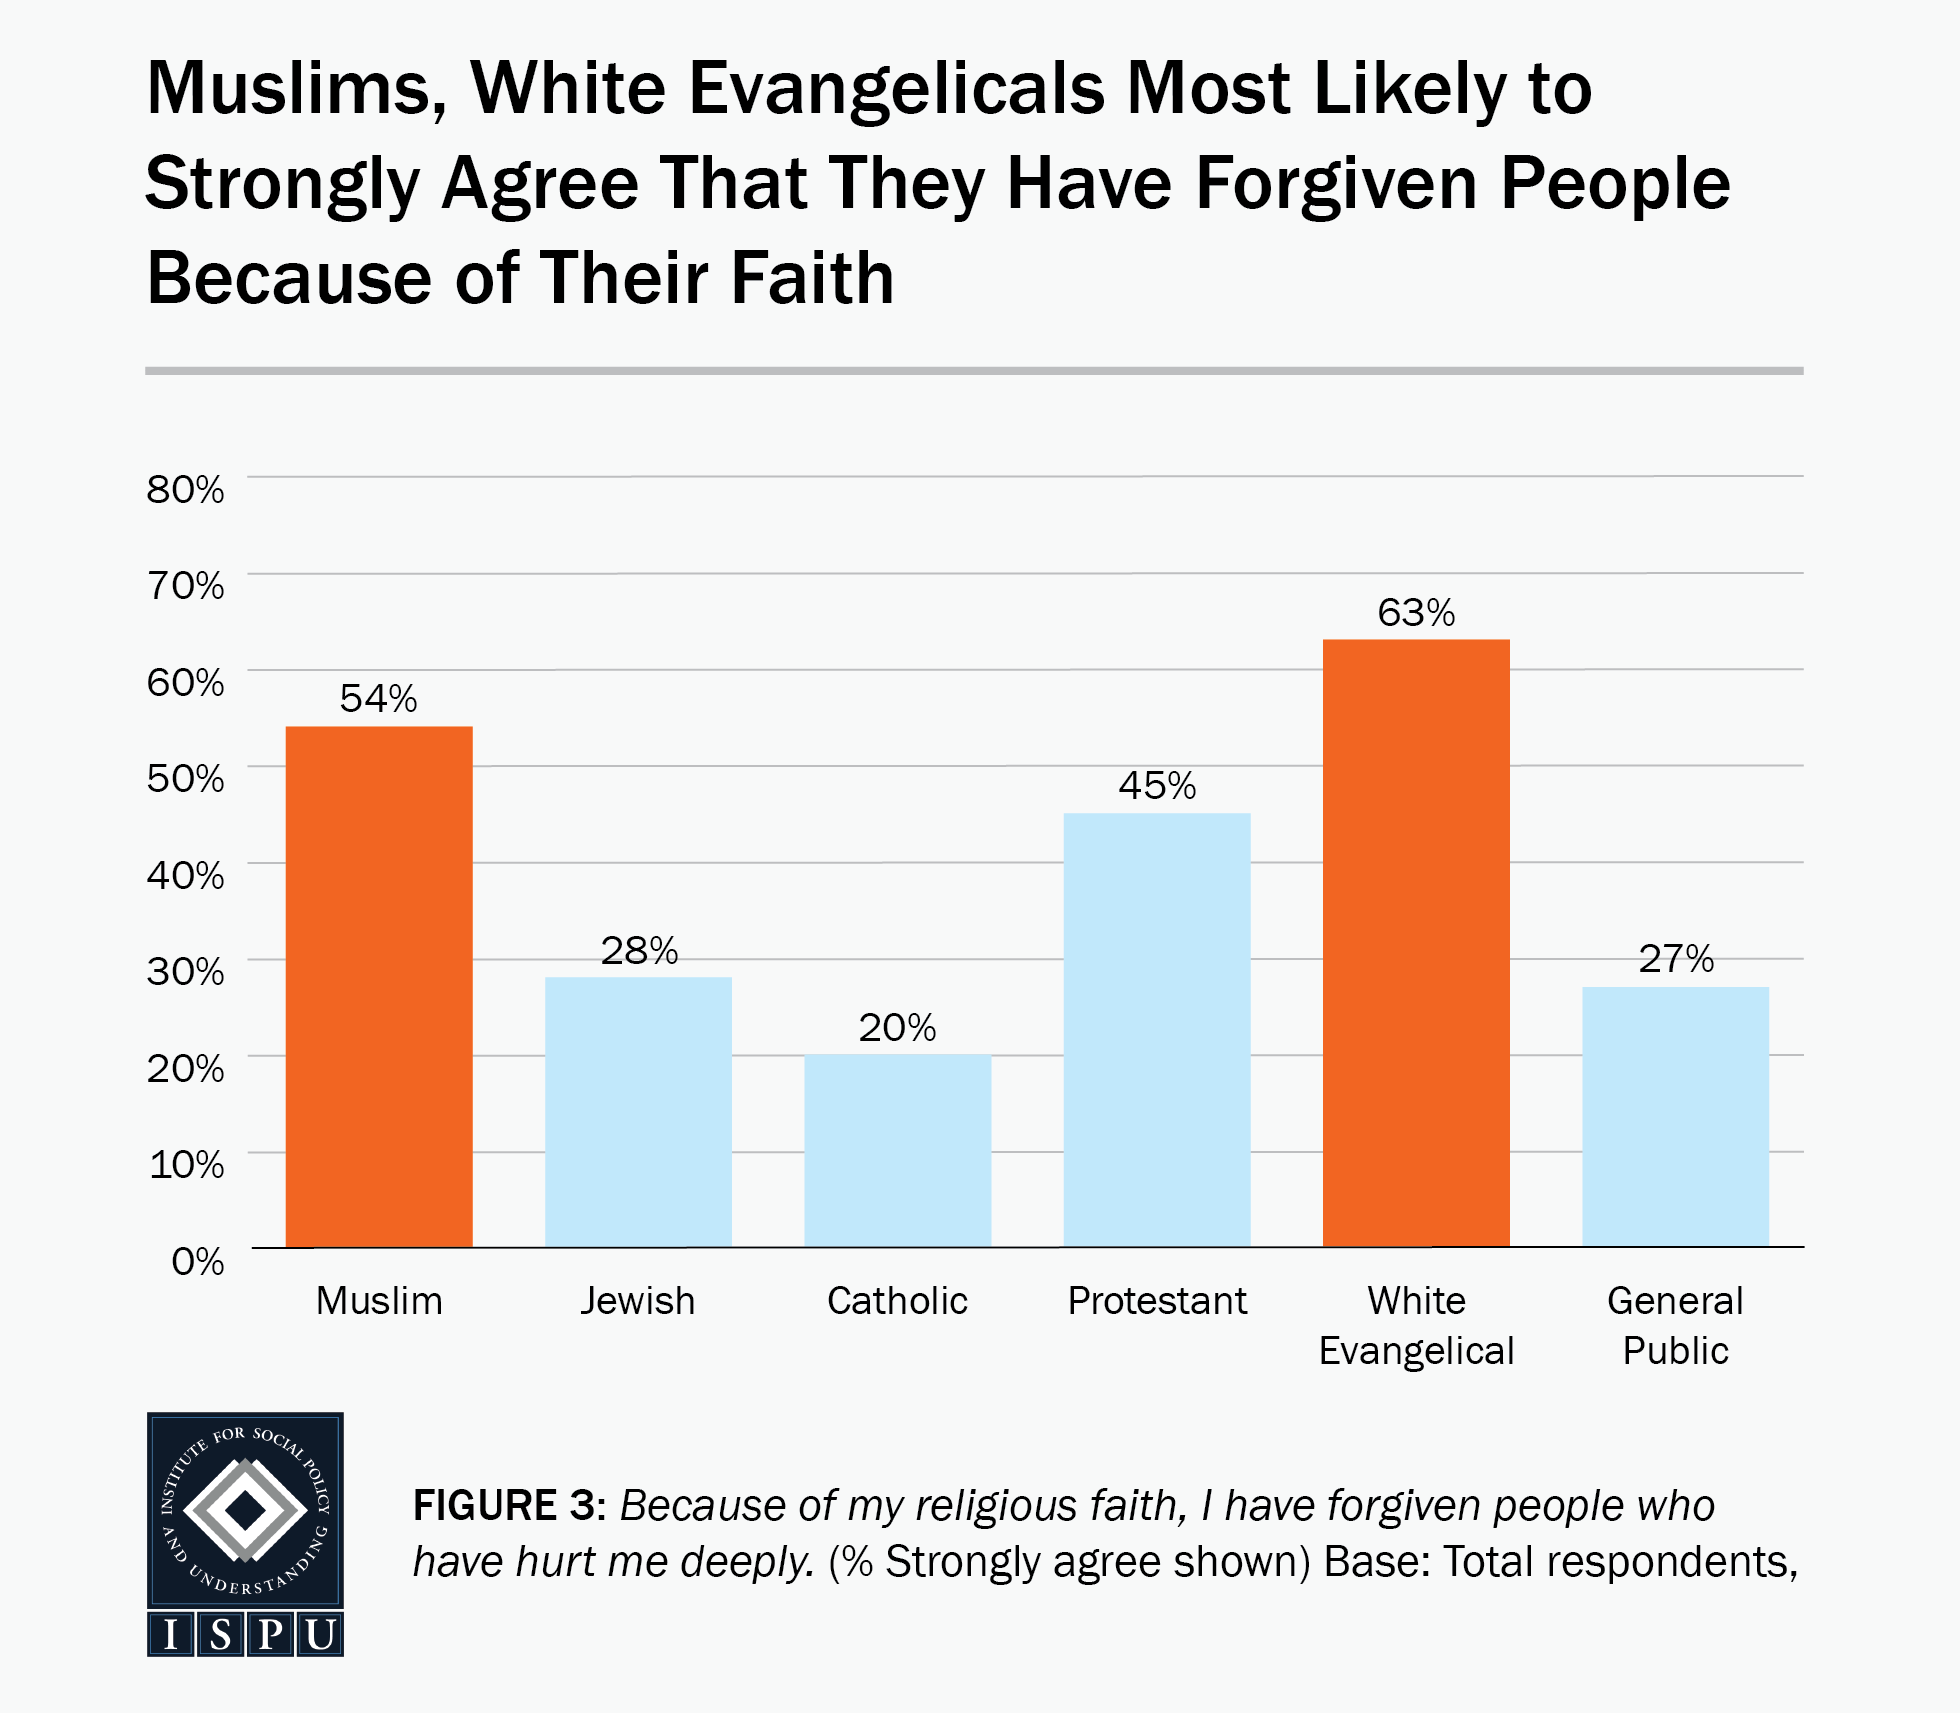 Figure 3: A bar graph showing that Muslims (54%) and White Evangelicals (63%) are the most likely faith groups to strongly agree that they have forgiven people because of their faith